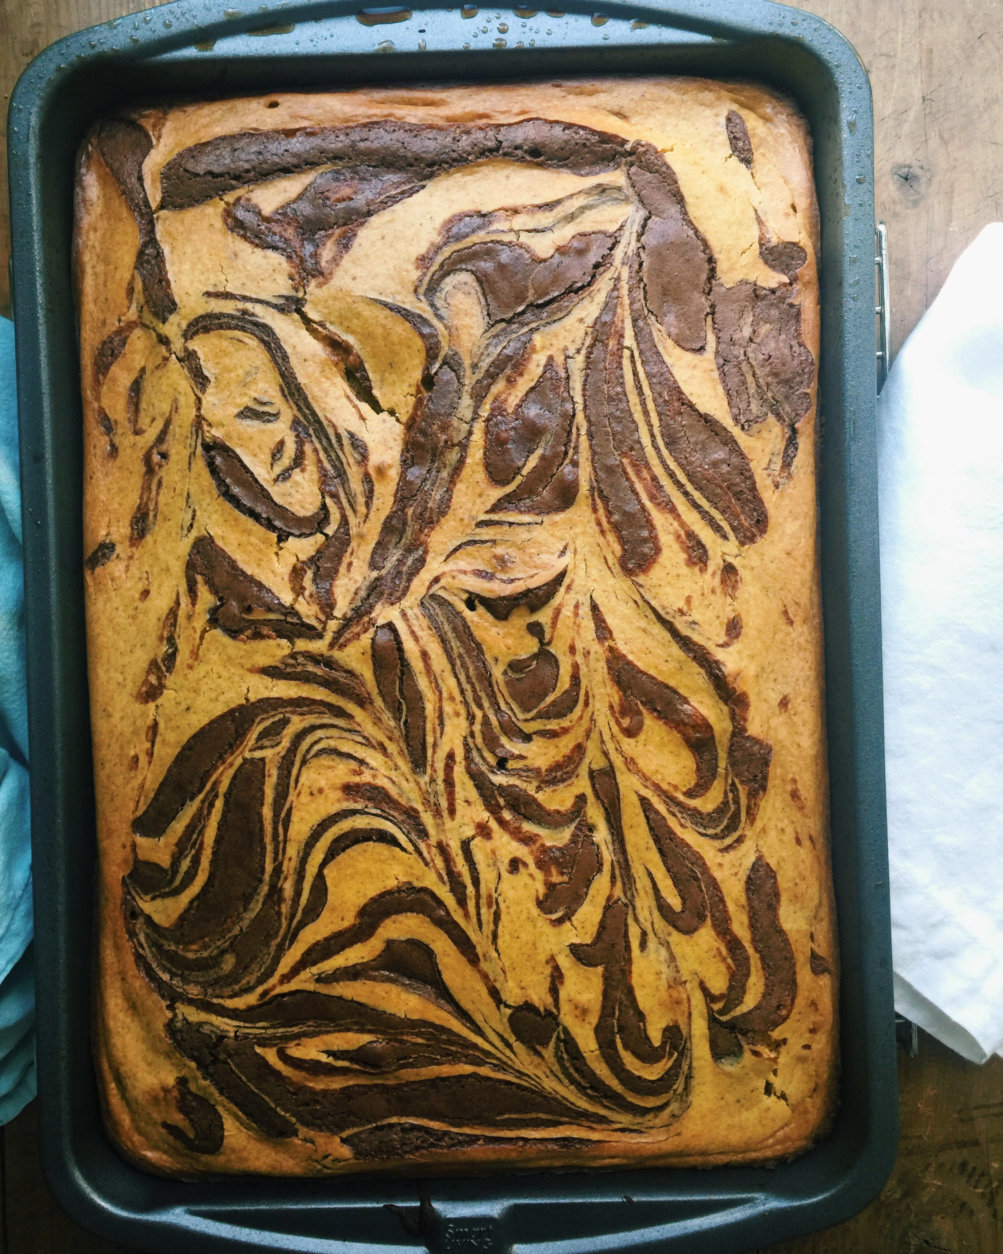 This September 2016 photo shows pumpkin cream cheese swirled chocolate brownies in New York. This dish is from a recipe by Katie Workman. (Katie Workman via AP)